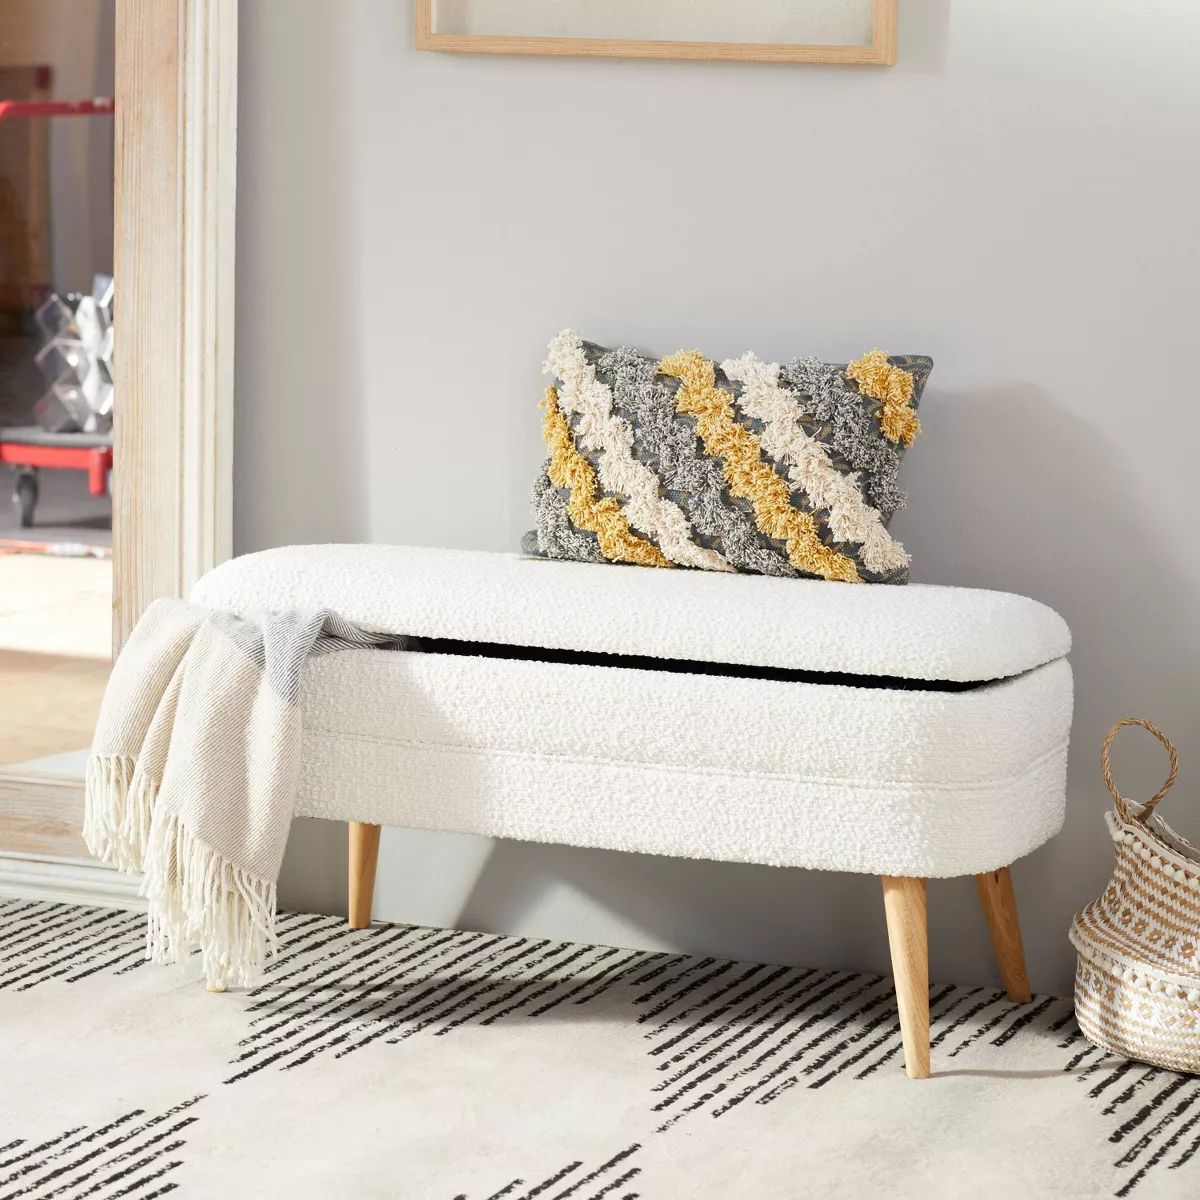 19" x 40" Contemporary Wood Storage Bench - Olivia & May | Target